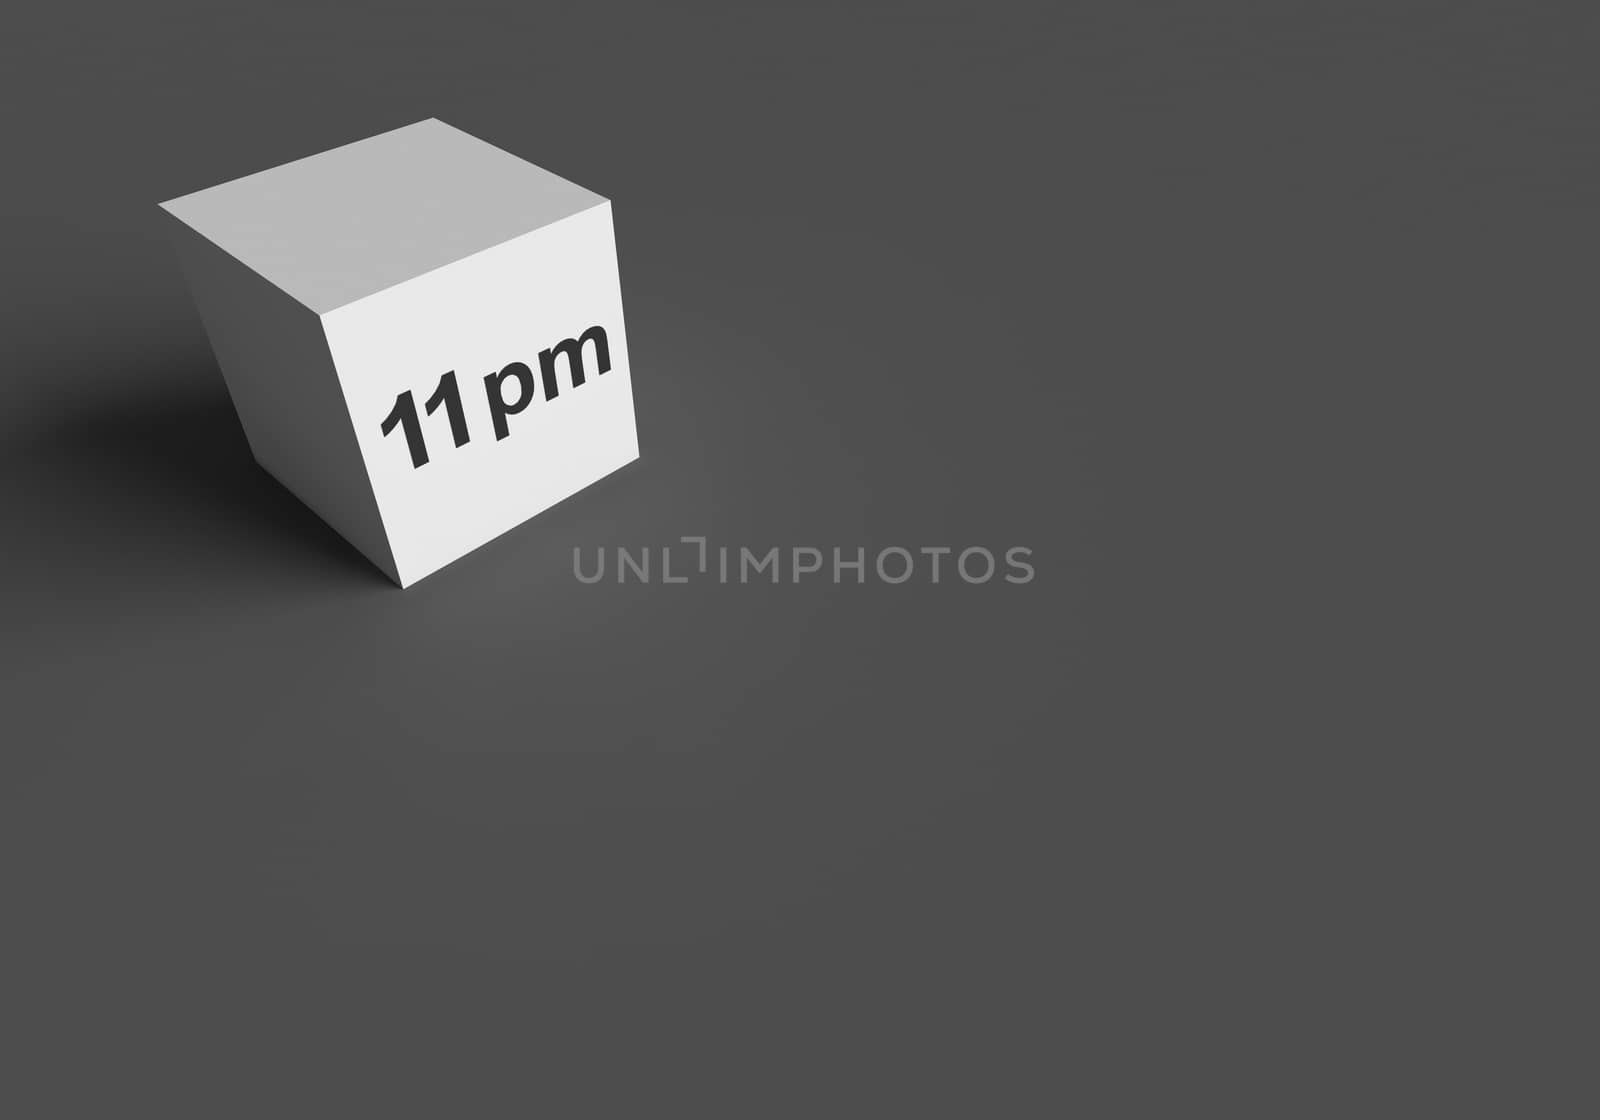 3D RENDERING WORDS 11 pm ON WHITE CUBE, STOCK PHOTO